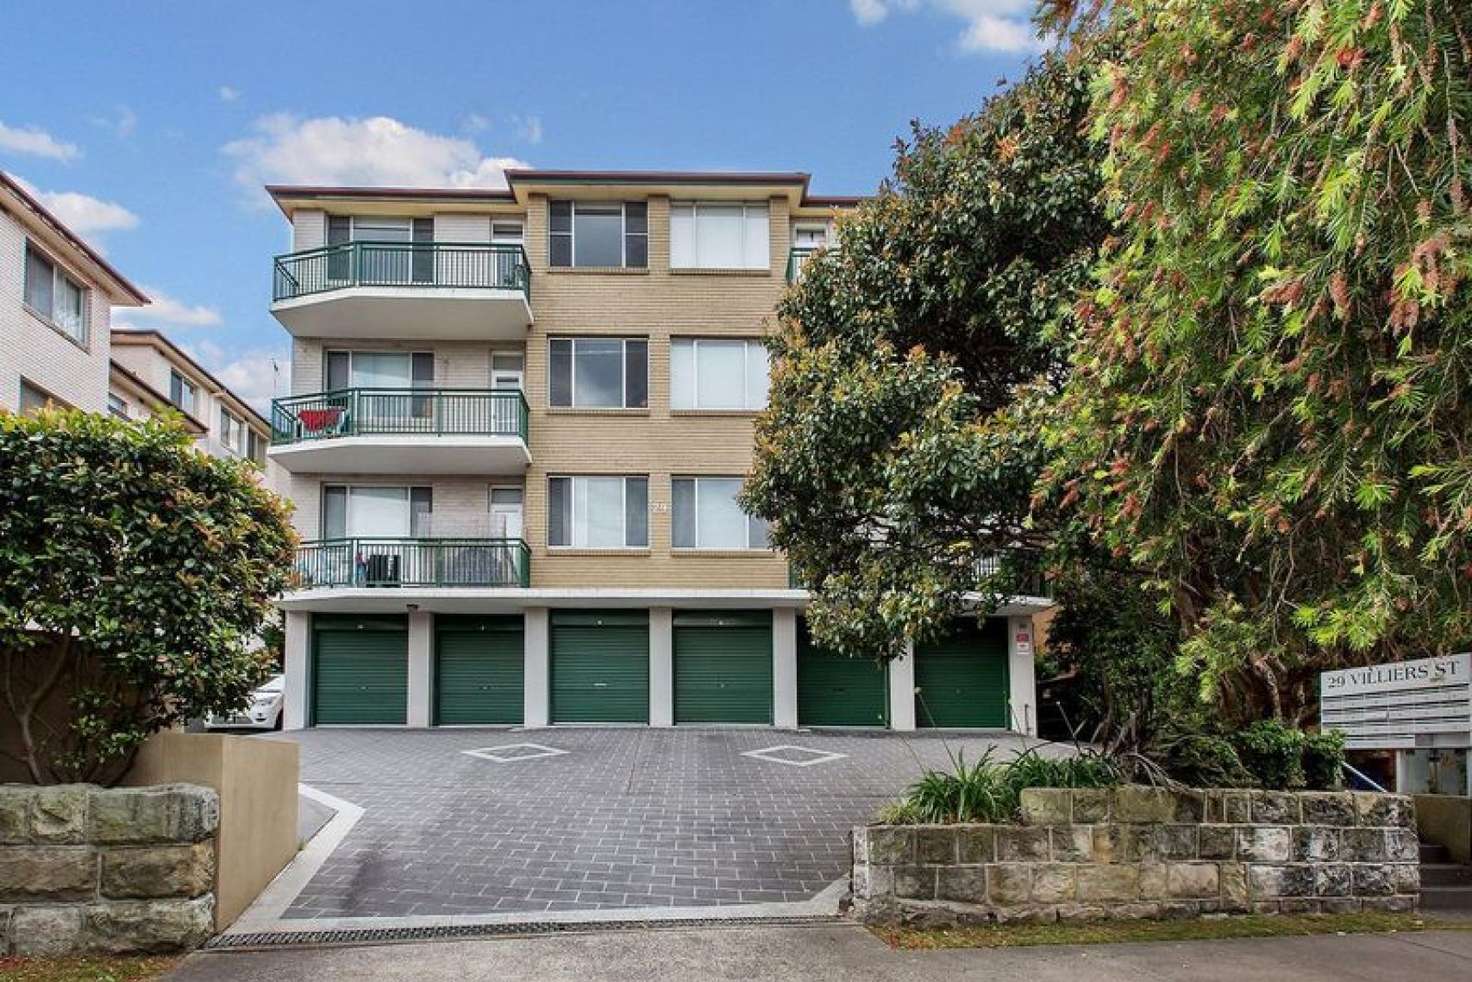 Main view of Homely apartment listing, 9/29 Villiers Street, Rockdale NSW 2216